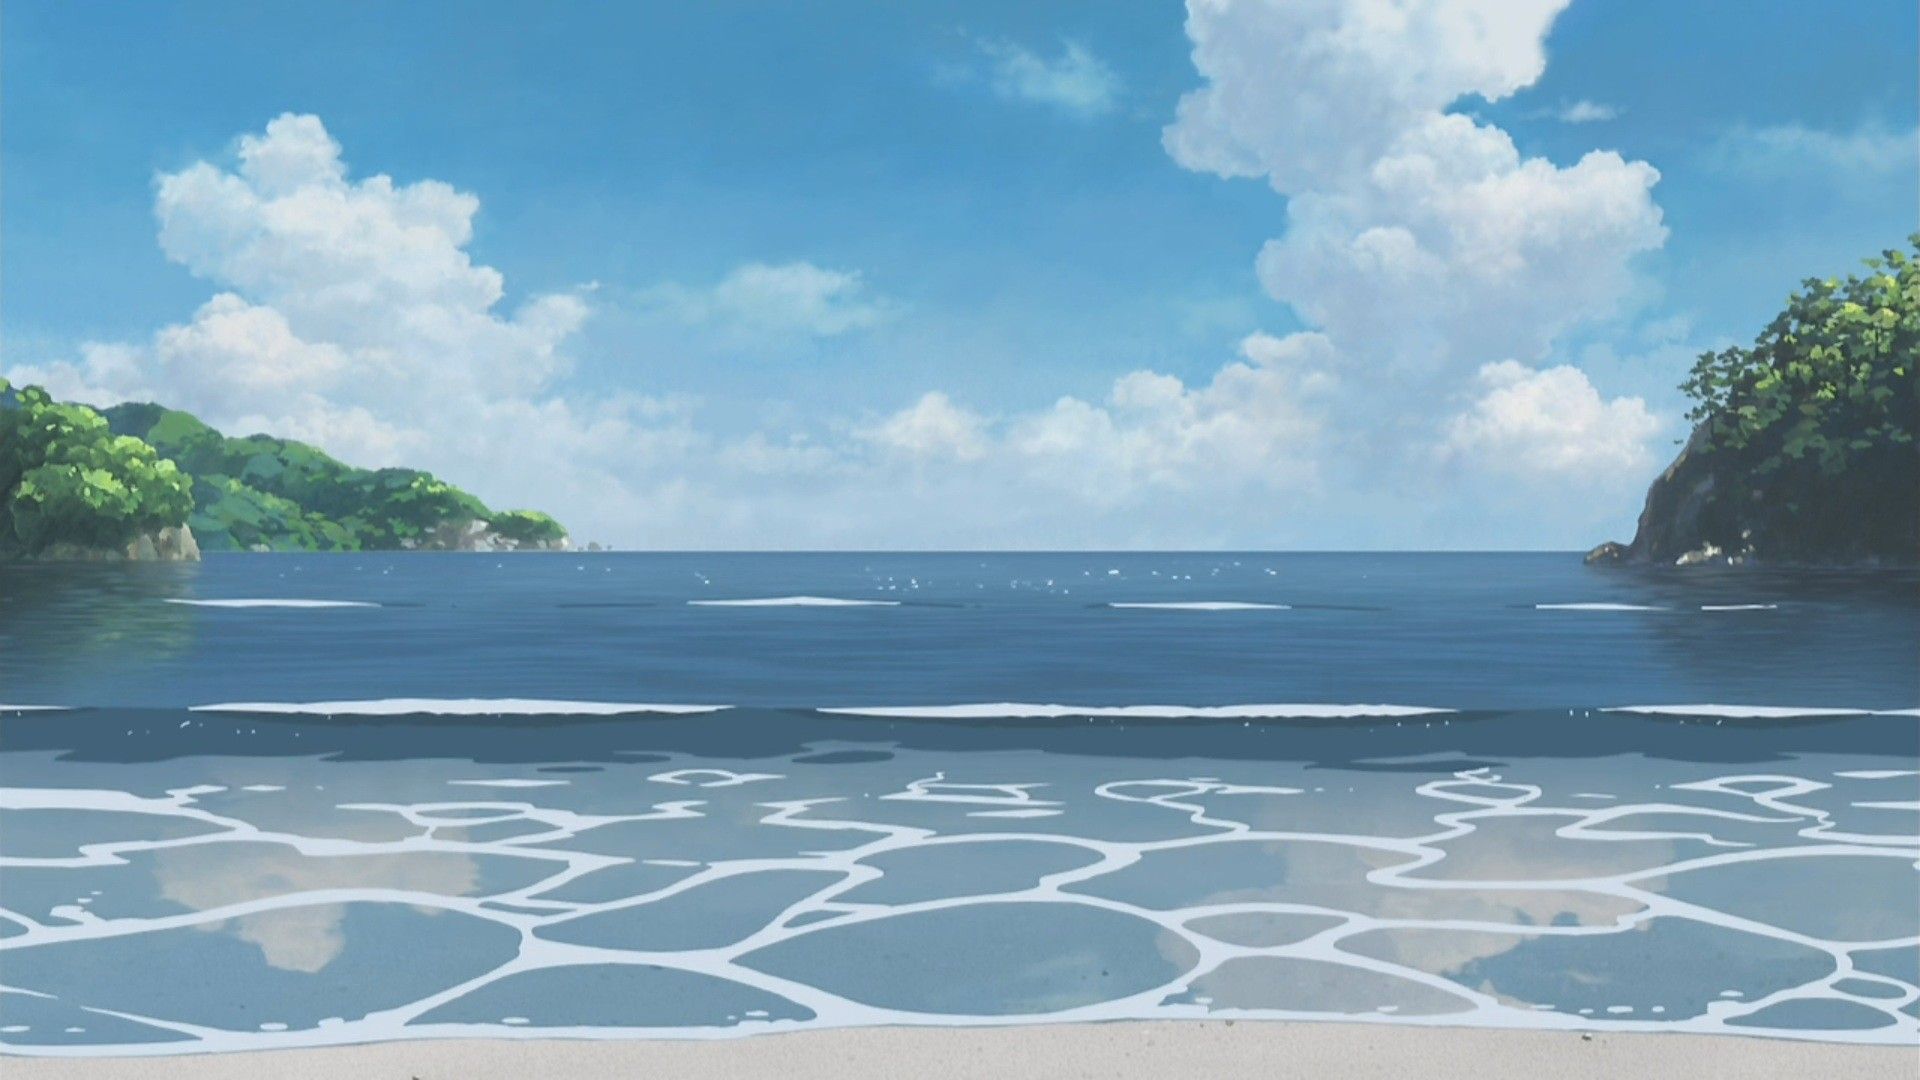 Calm Anime Backgrounds posted by John Walker.